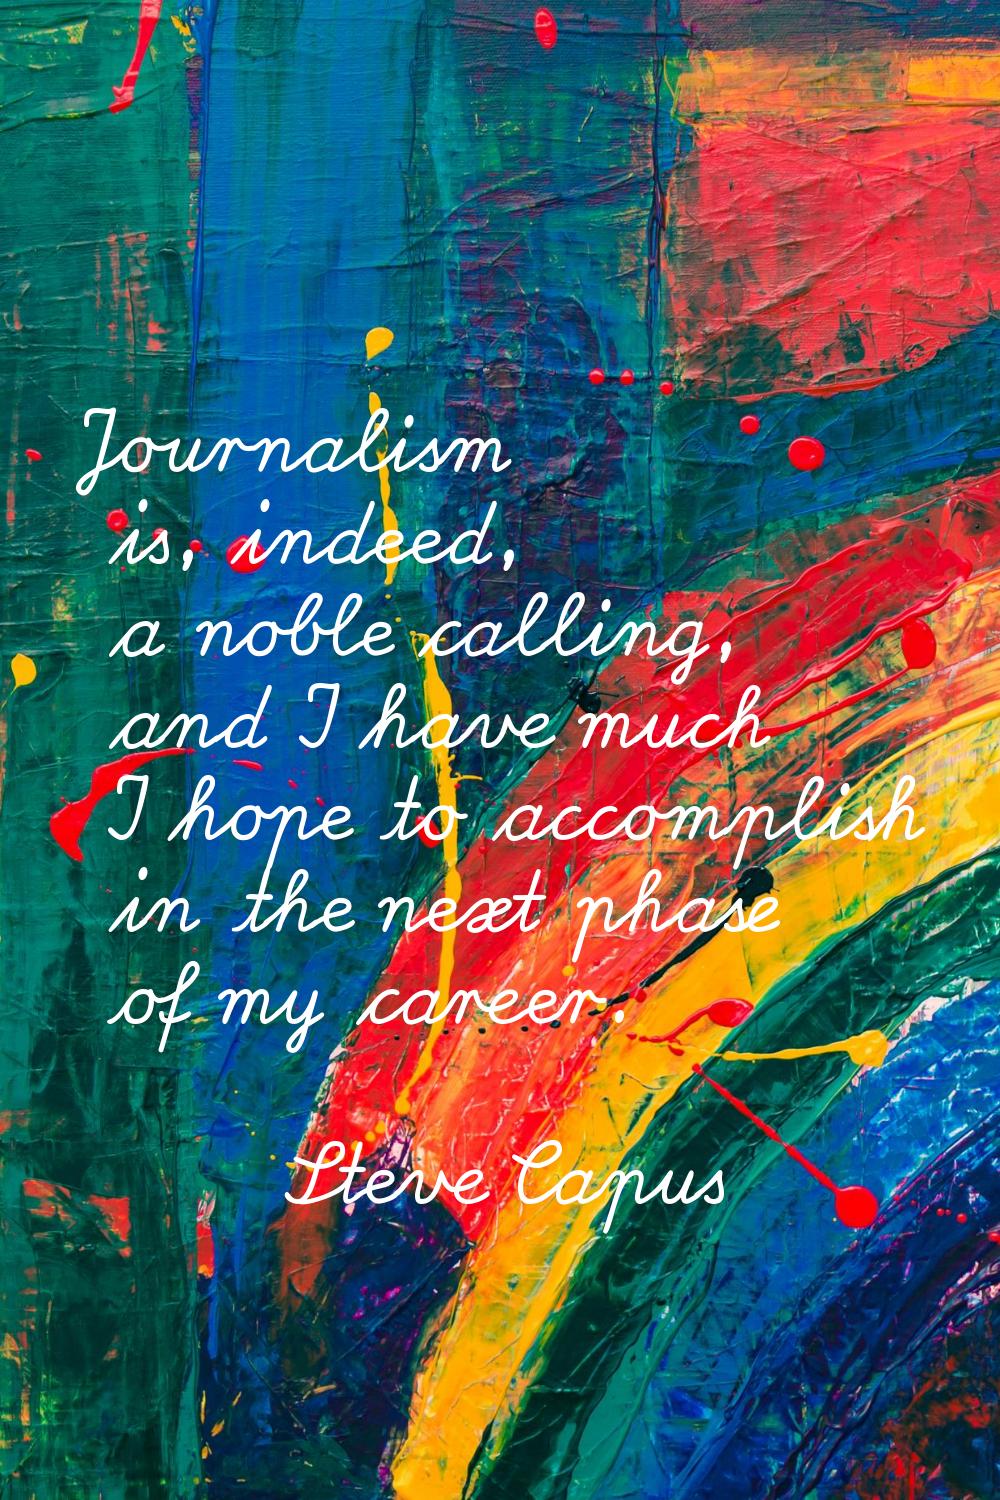 Journalism is, indeed, a noble calling, and I have much I hope to accomplish in the next phase of m